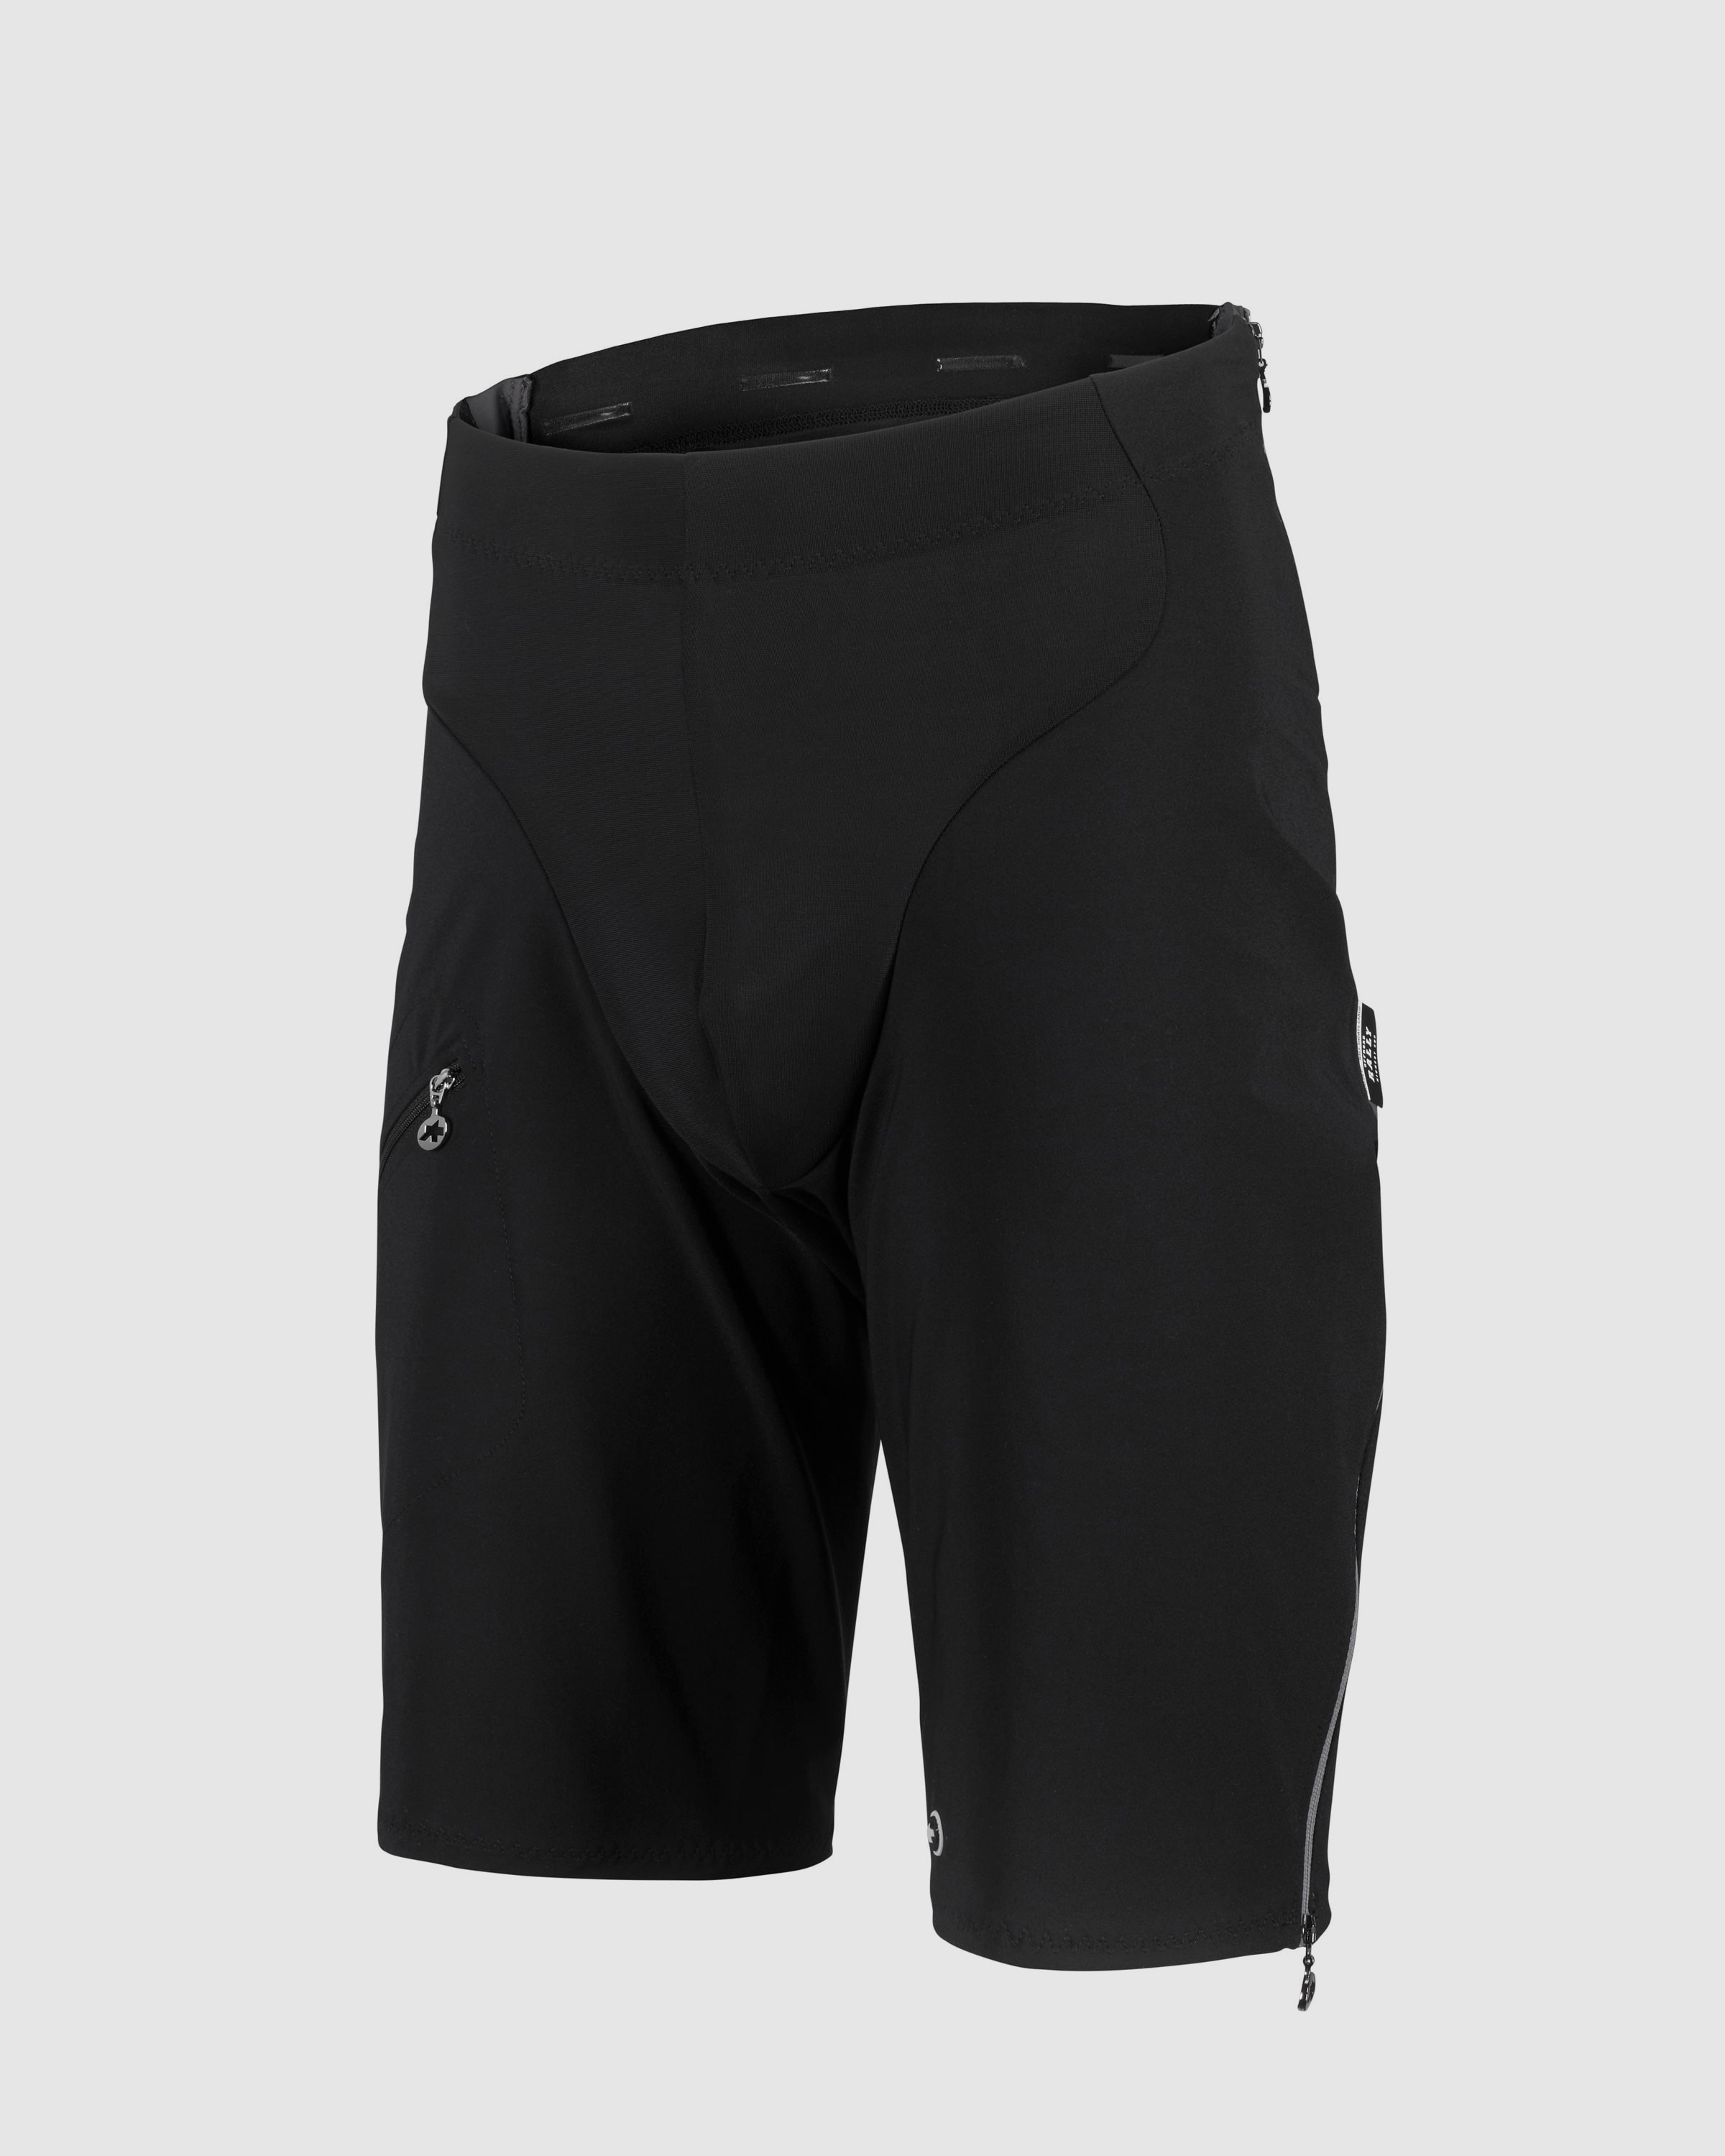 H.rallycargoShorts_s7 - ASSOS Of Switzerland - Official Outlet